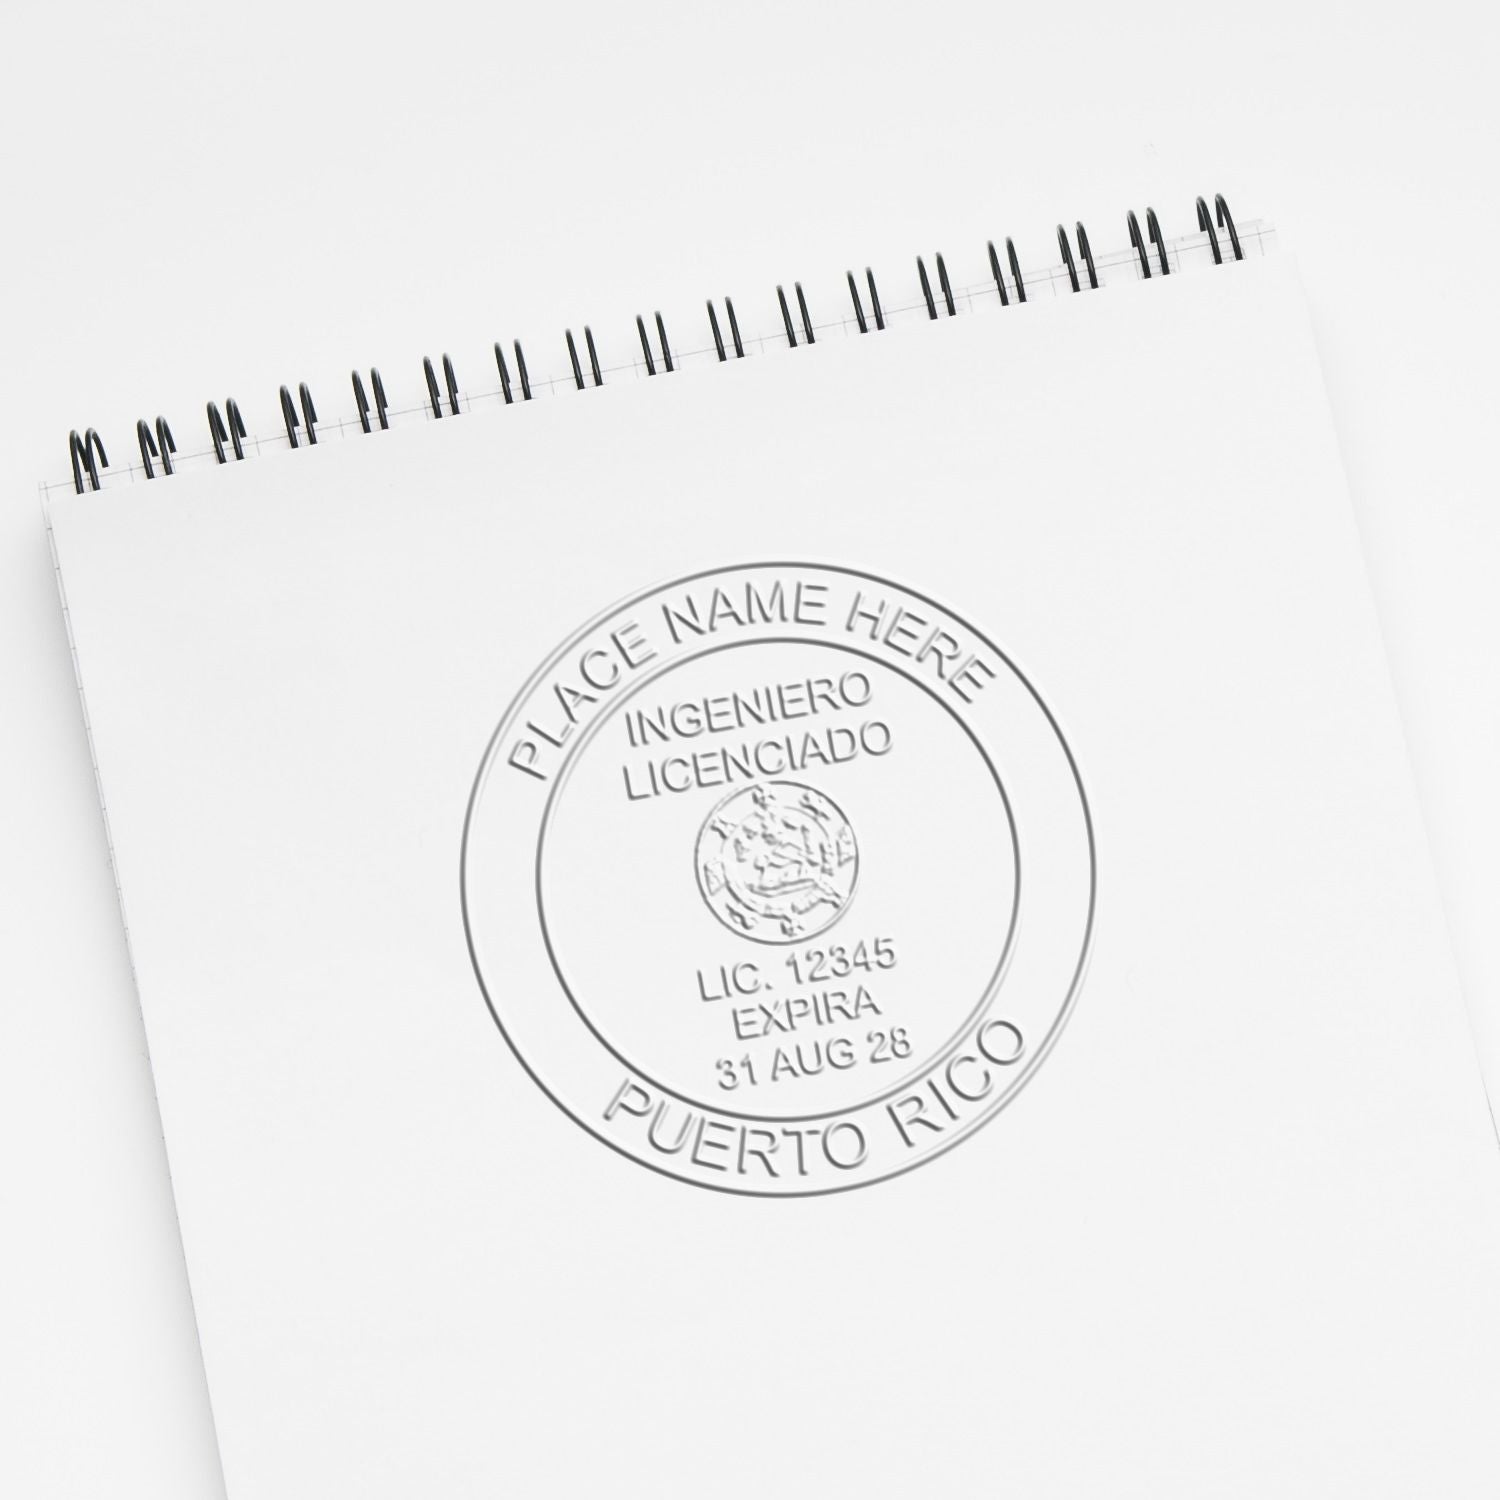 This paper is stamped with a sample imprint of the Puerto Rico Engineer Desk Seal, signifying its quality and reliability.